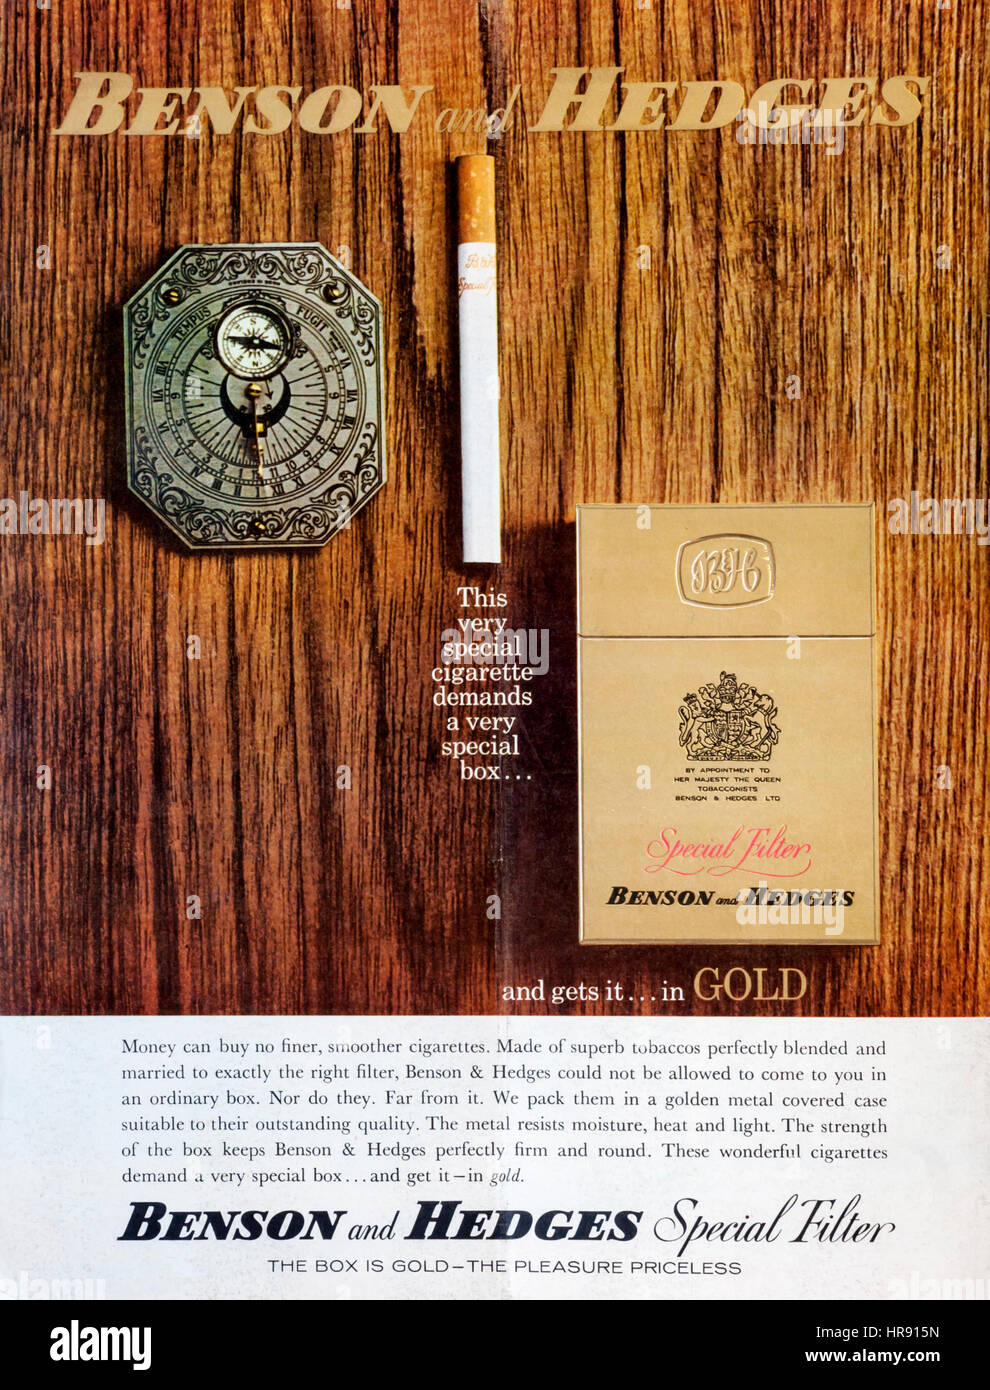 1960s magazine advertisement for Benson and Hedges cigarettes. Stock Photo